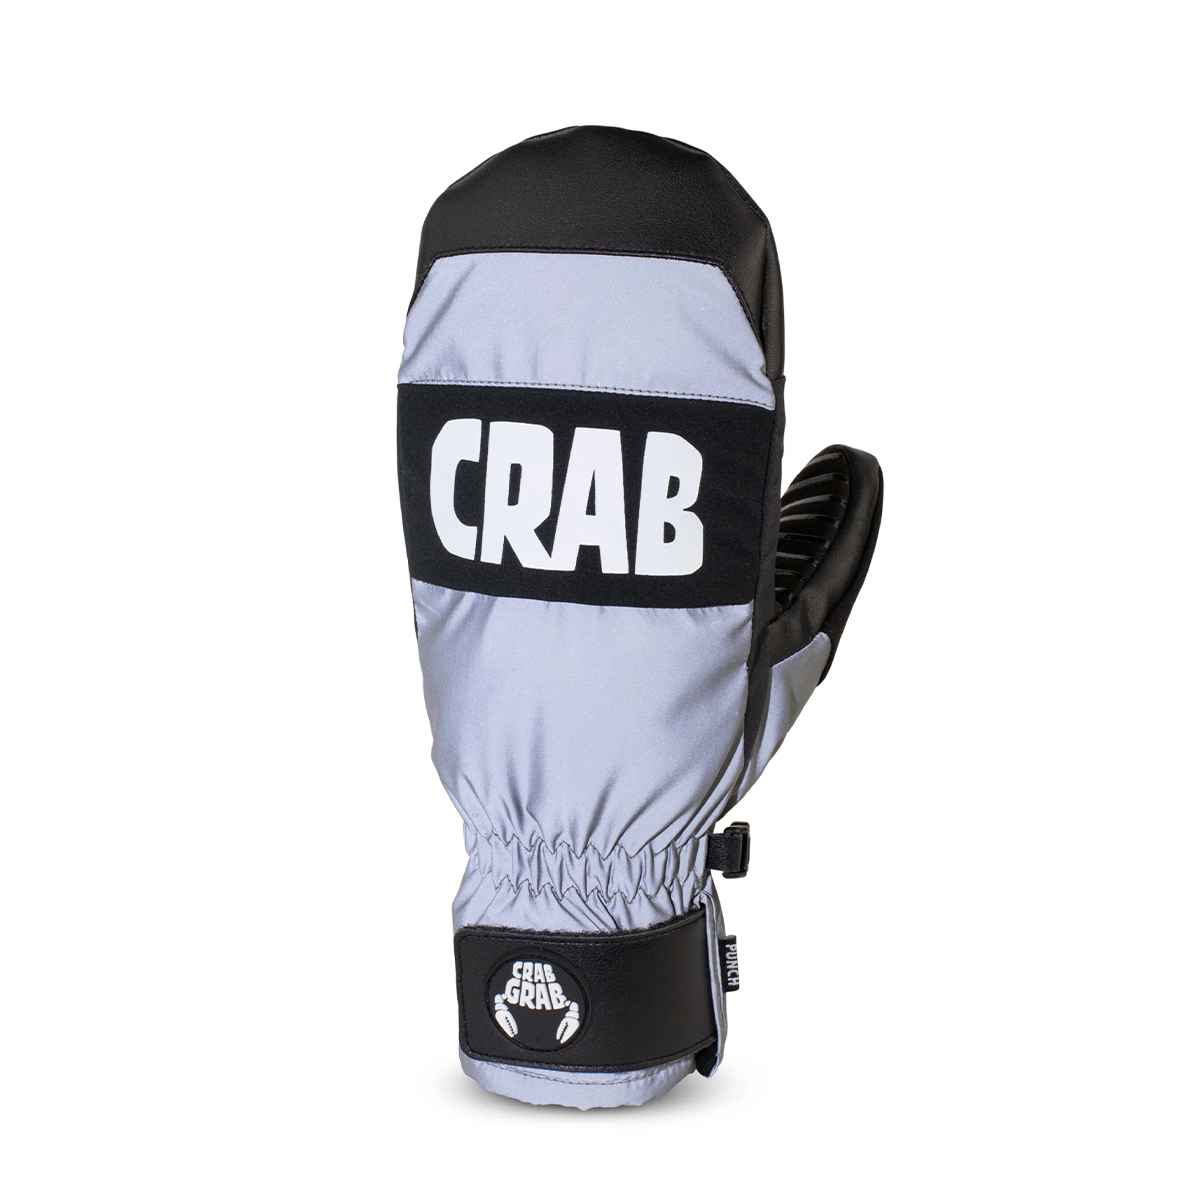 Crab Grab Youth Punch Mittens - Reflective